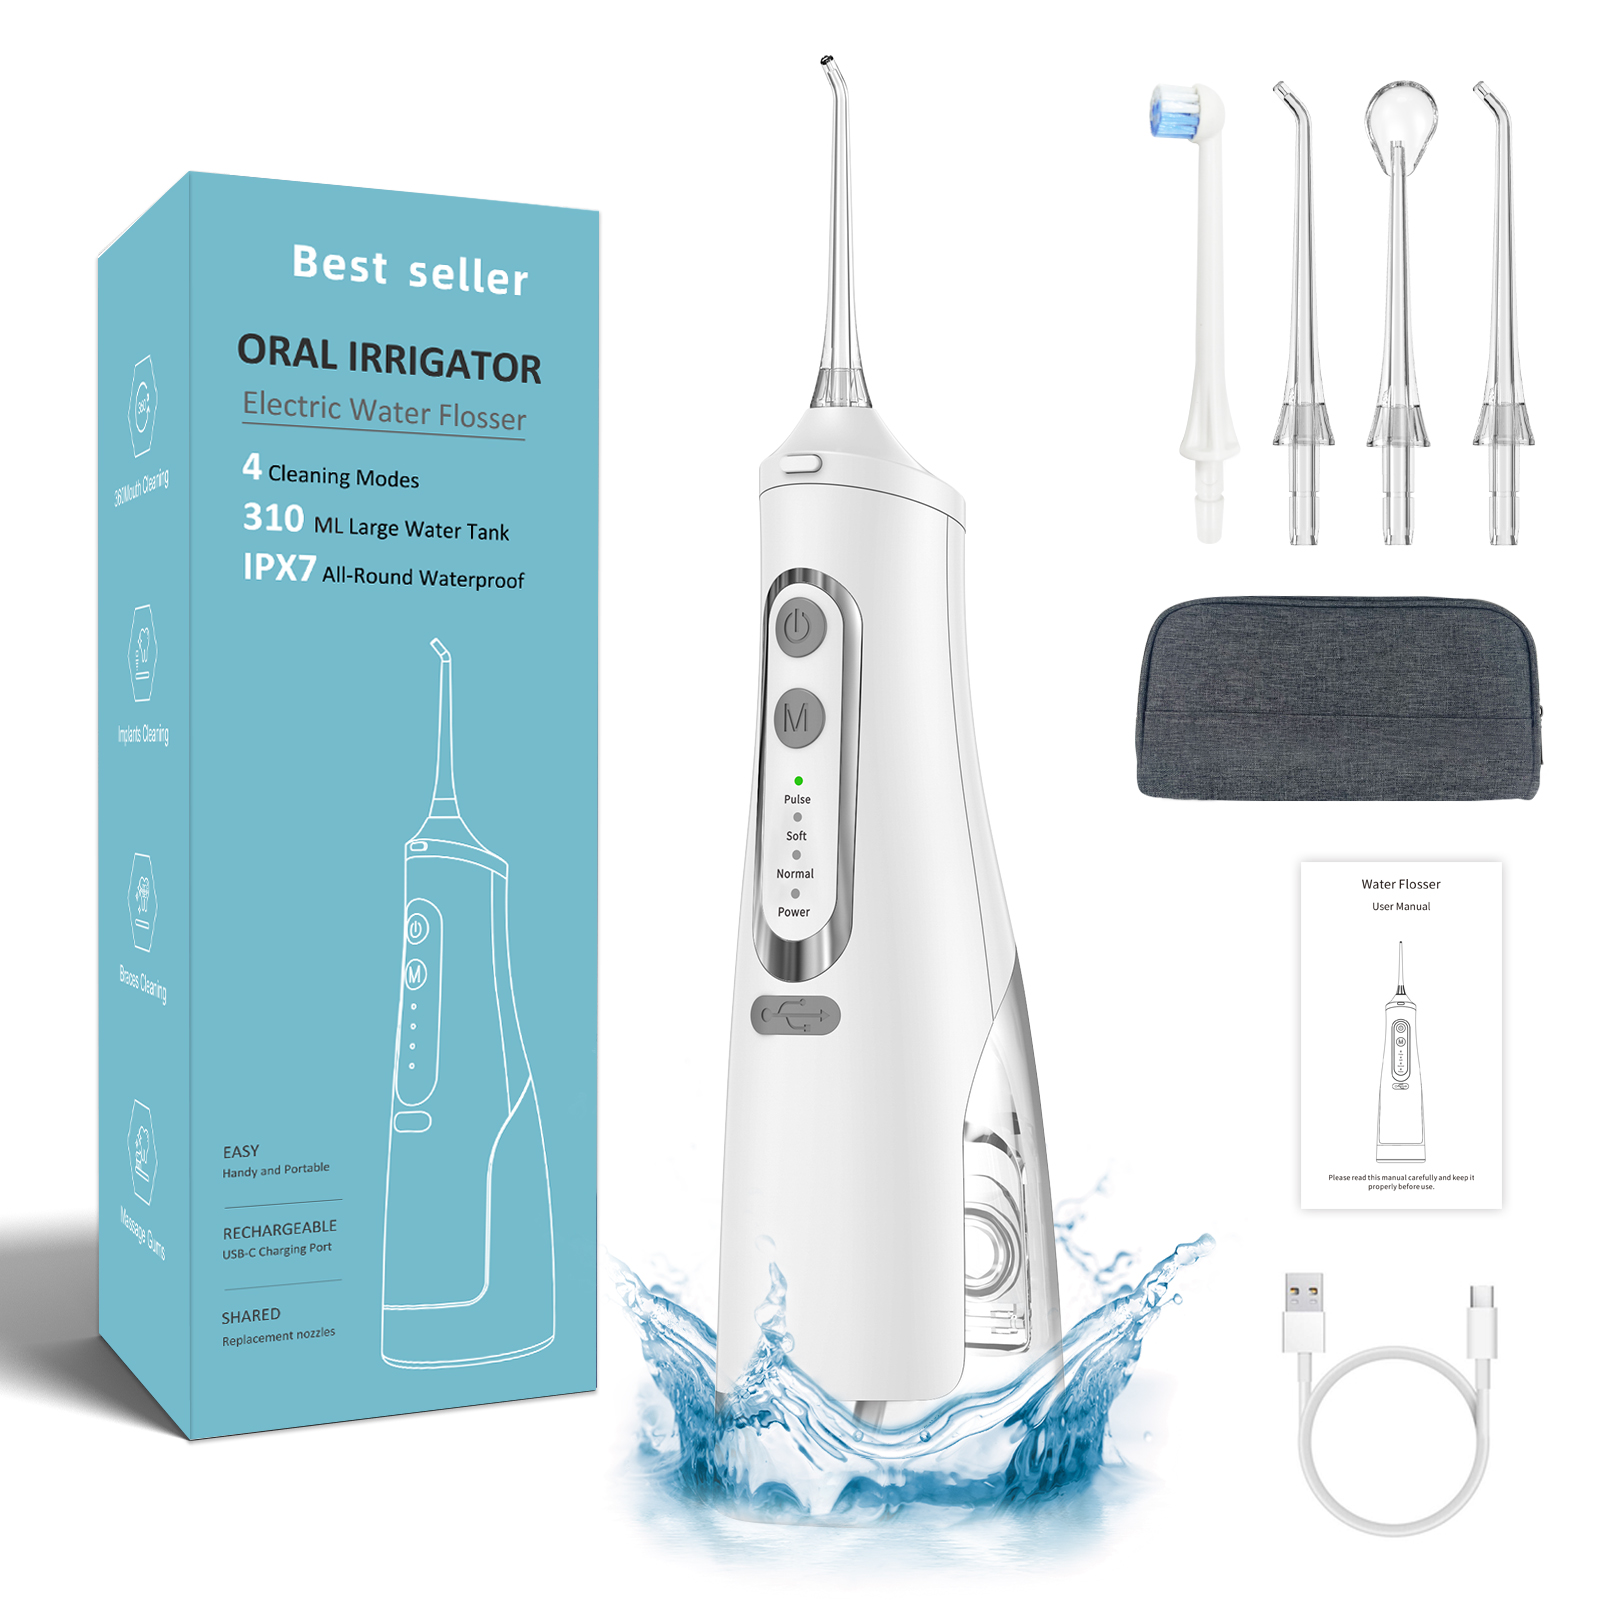 How To Guide: Electric Toothbrush and Water Flosser (with Implants)